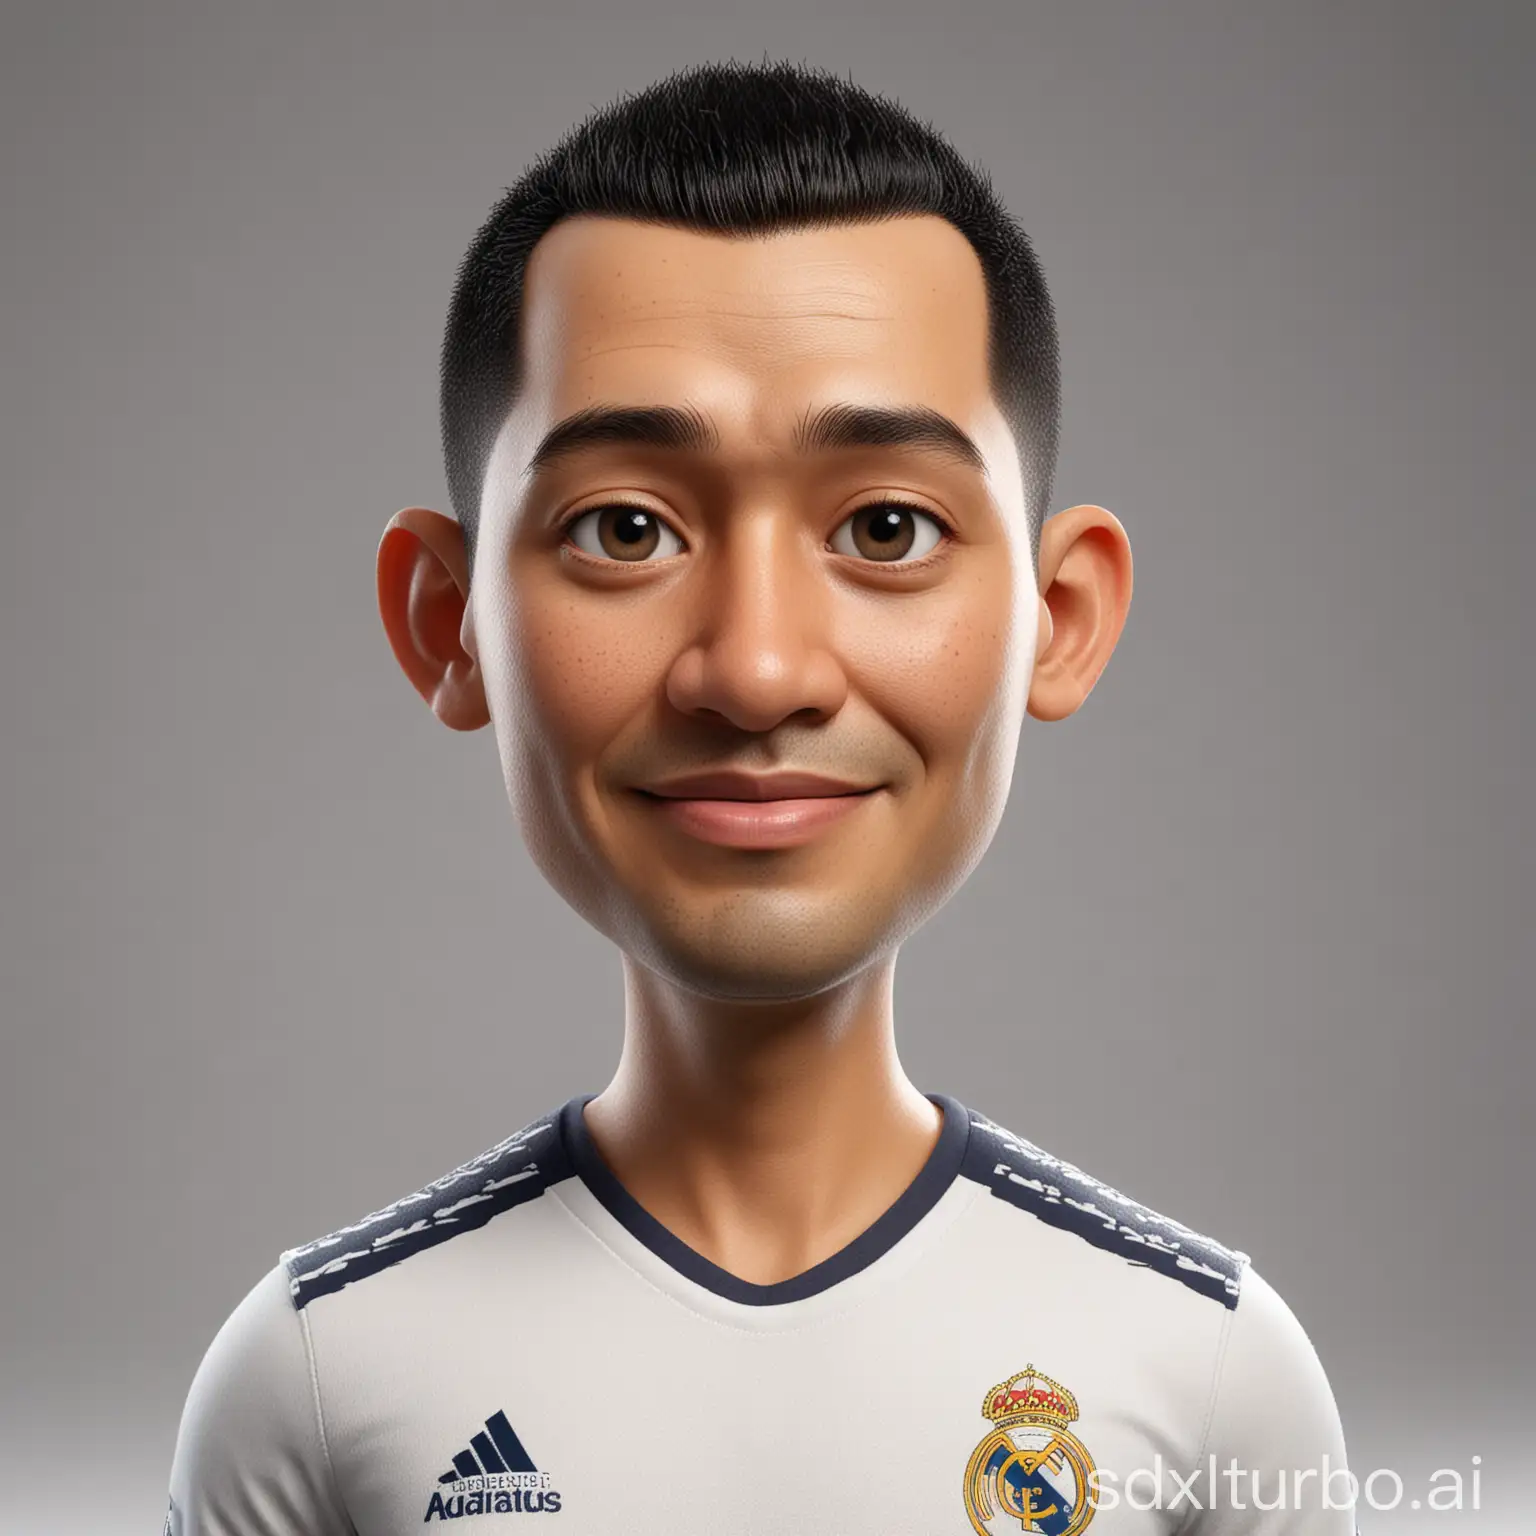 Create a full 3D cartoon style body with a big head. A 40 year old Indonesian man. Height, ideal body, oval face shape. beautiful, slightly round eyes, clean white skin, thin sweet smile. buzzcut black hair. Wearing a real madrid shirt. Body position is clearly visible. The background is solid white. Use soft photography lighting, hair lighting, top lighting, side lighting. Highest quality photos, Uhd,16k